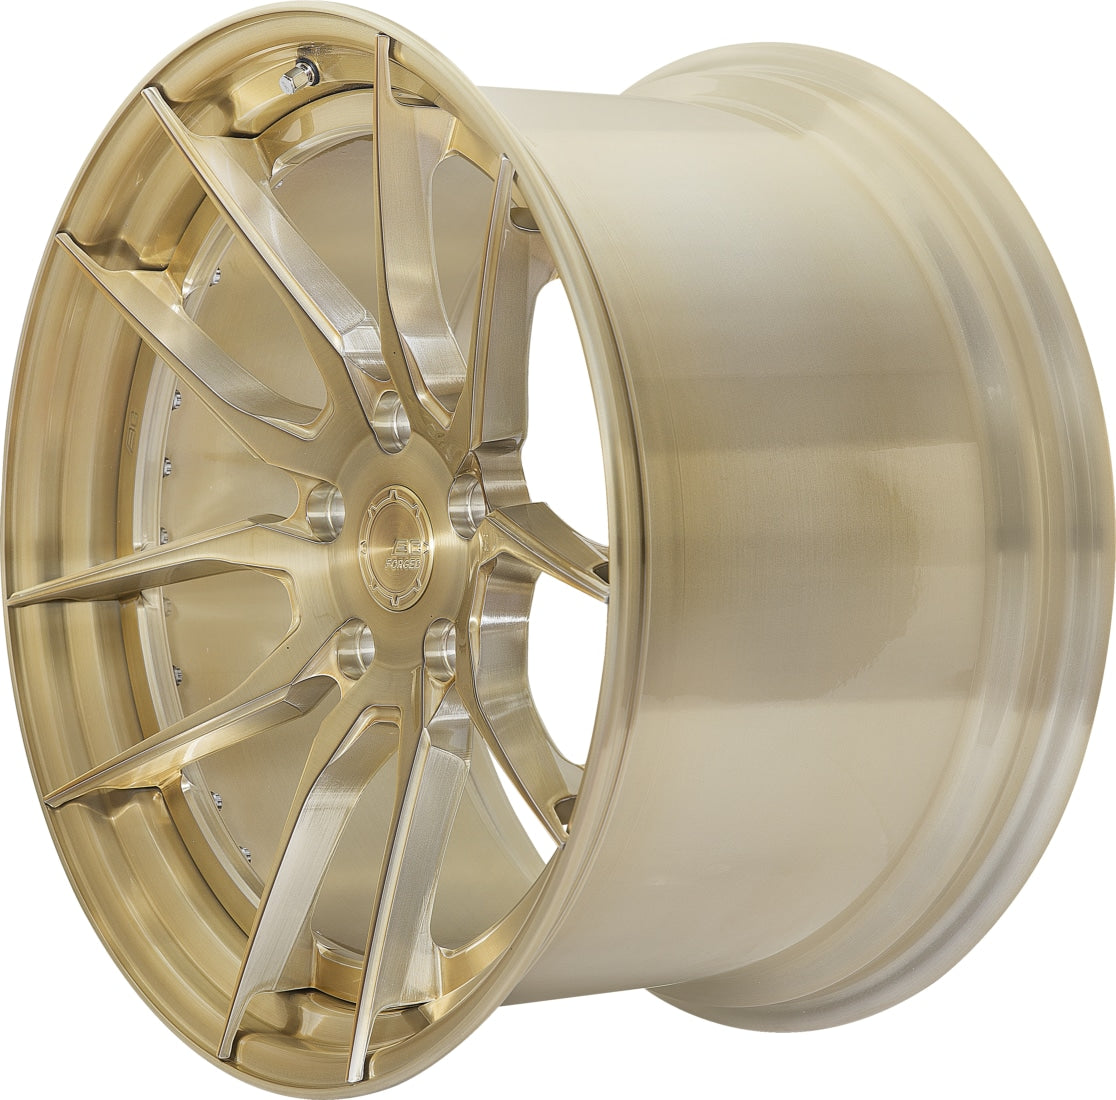 BC Forged HCA162- 2PC Modular Wheels - MODE Auto Concepts